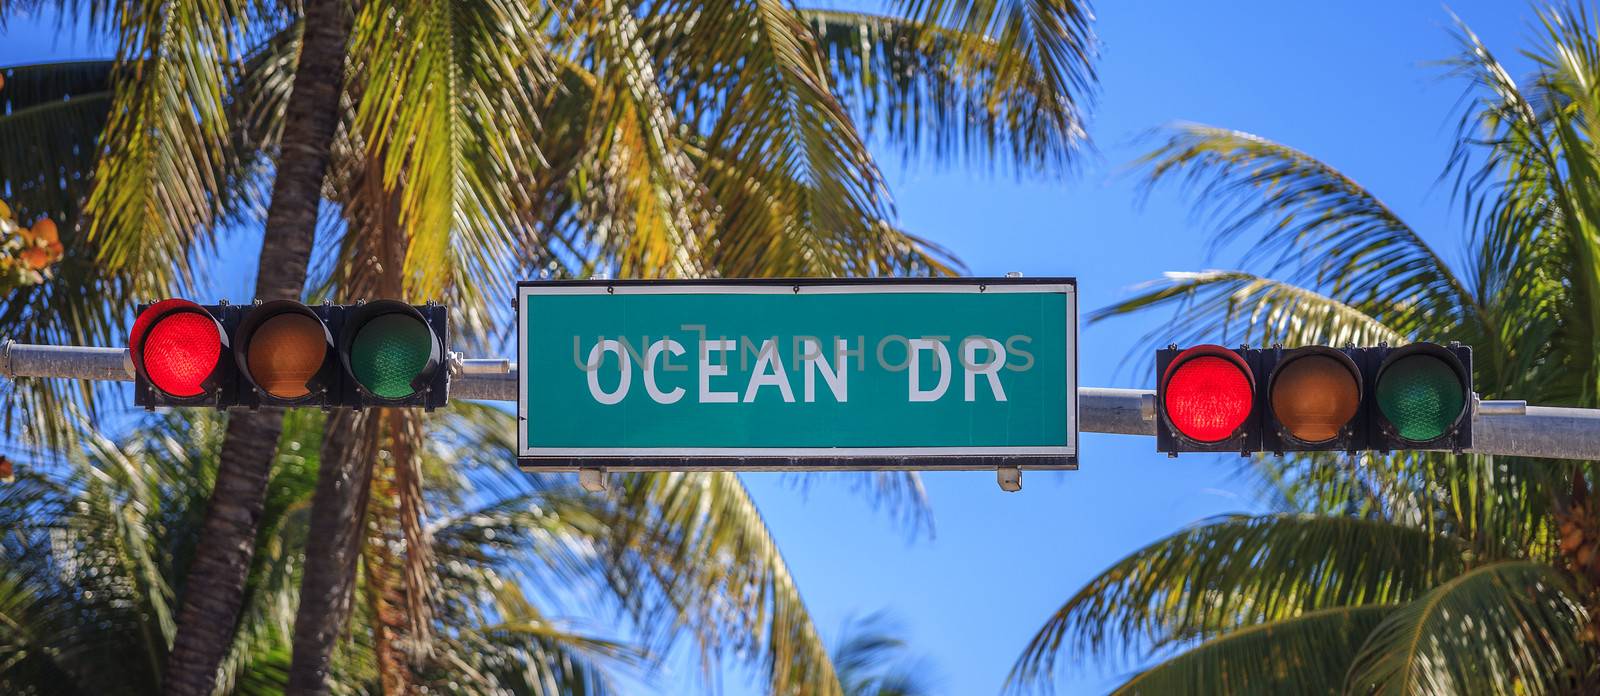 street sign of street Ocean Drive in Miami South with traffic light 